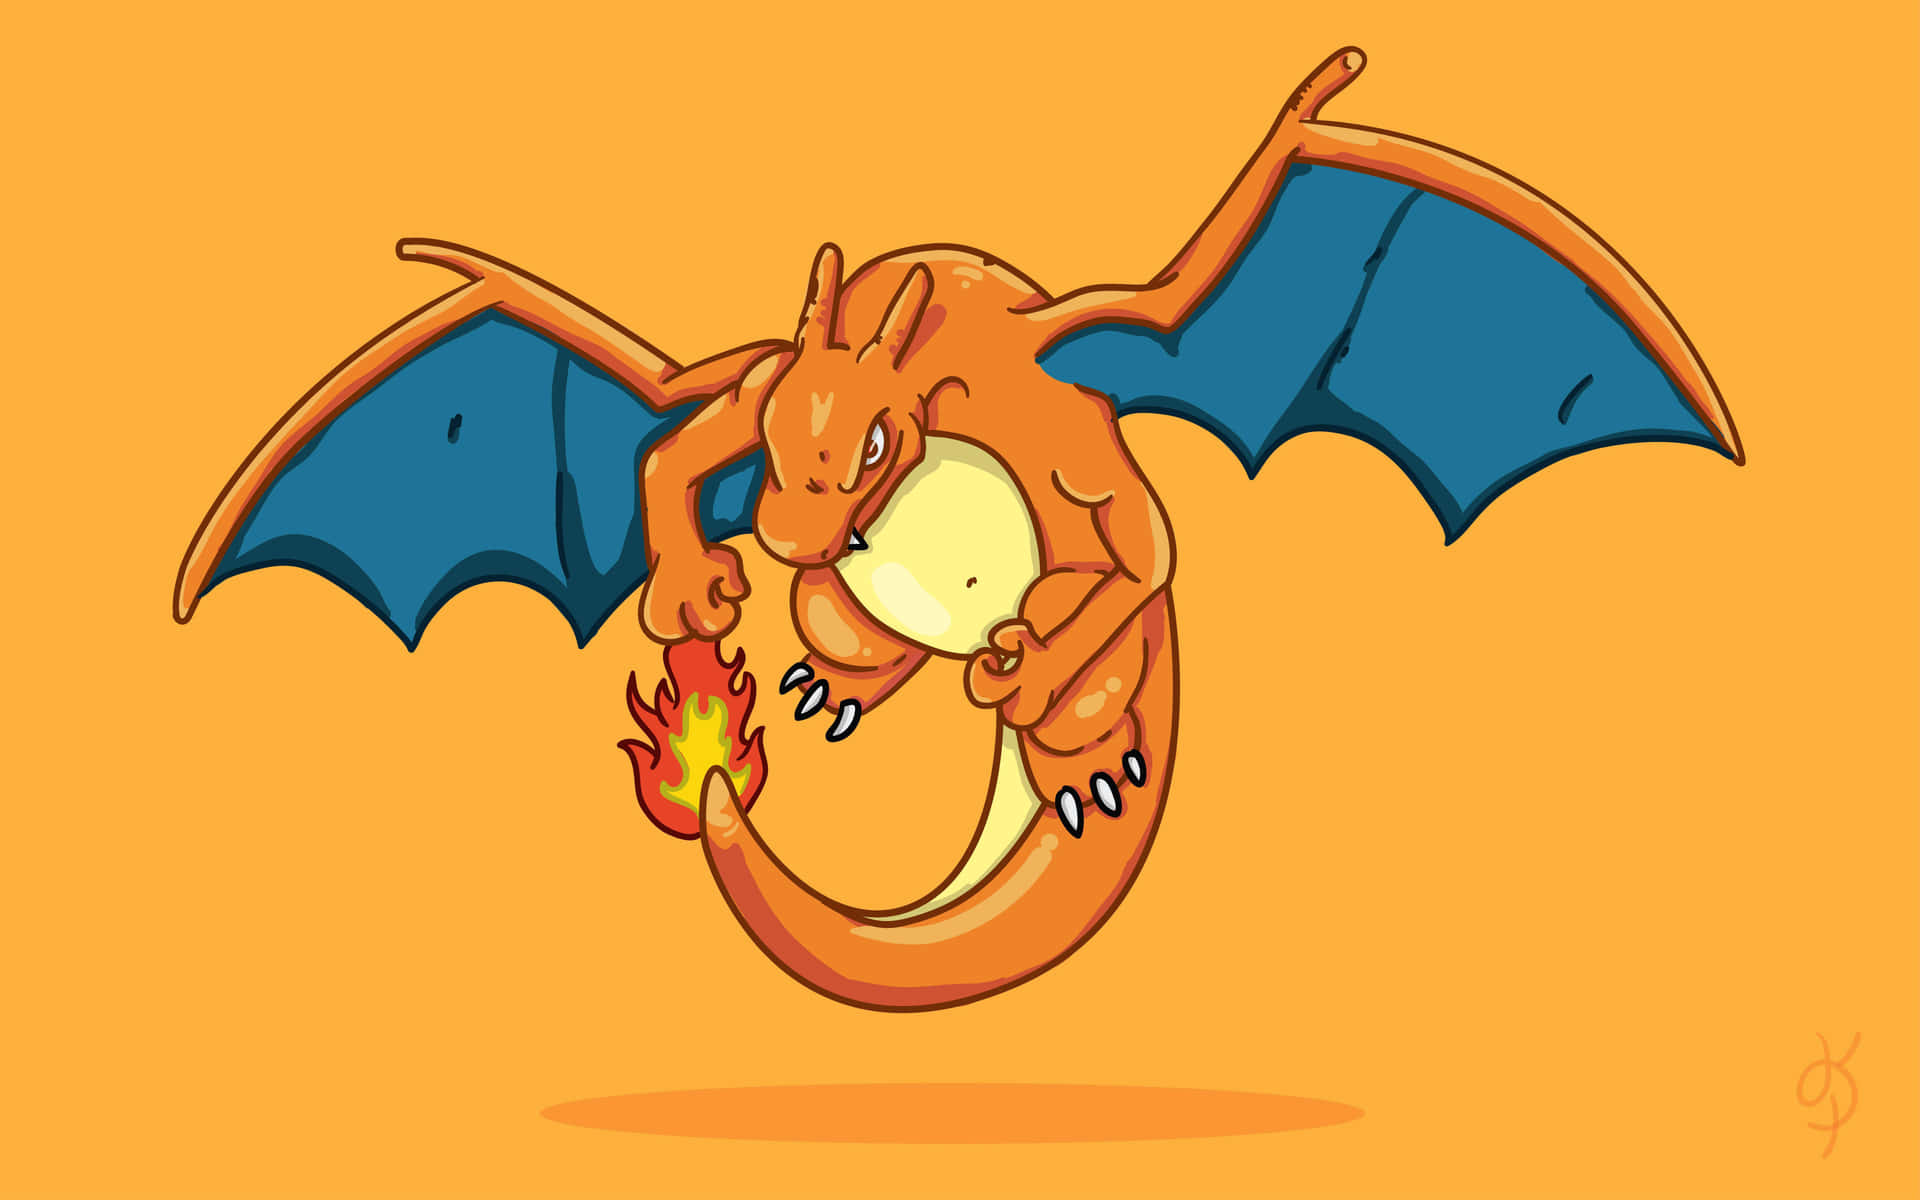 Charizard unleashes its fiery power in a stunning display